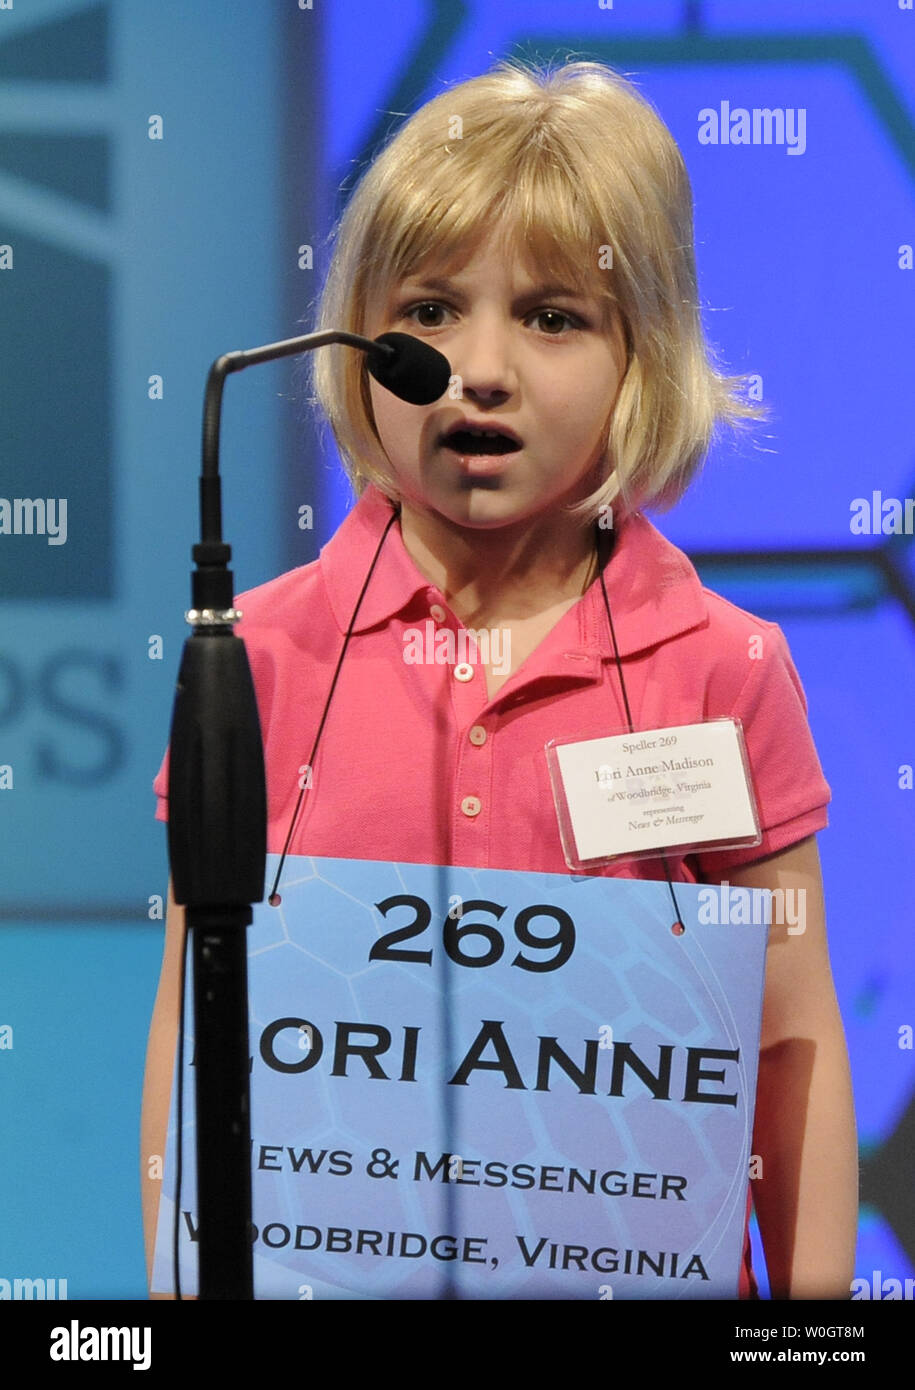 Lori Anne Madison, 6, of Woodbridge, Virginia, spells out the letters in her word as she competes during the opening round of the Scripps National Spelling Bee, May 30, 2012, in National Harbor, Maryland. Madison, the youngest known qualifier in the history of the contest, correctly spelled the word 'dirigible*', a lighter-than-air aircraft, to advance.        UPI/Mike Theiler Stock Photo